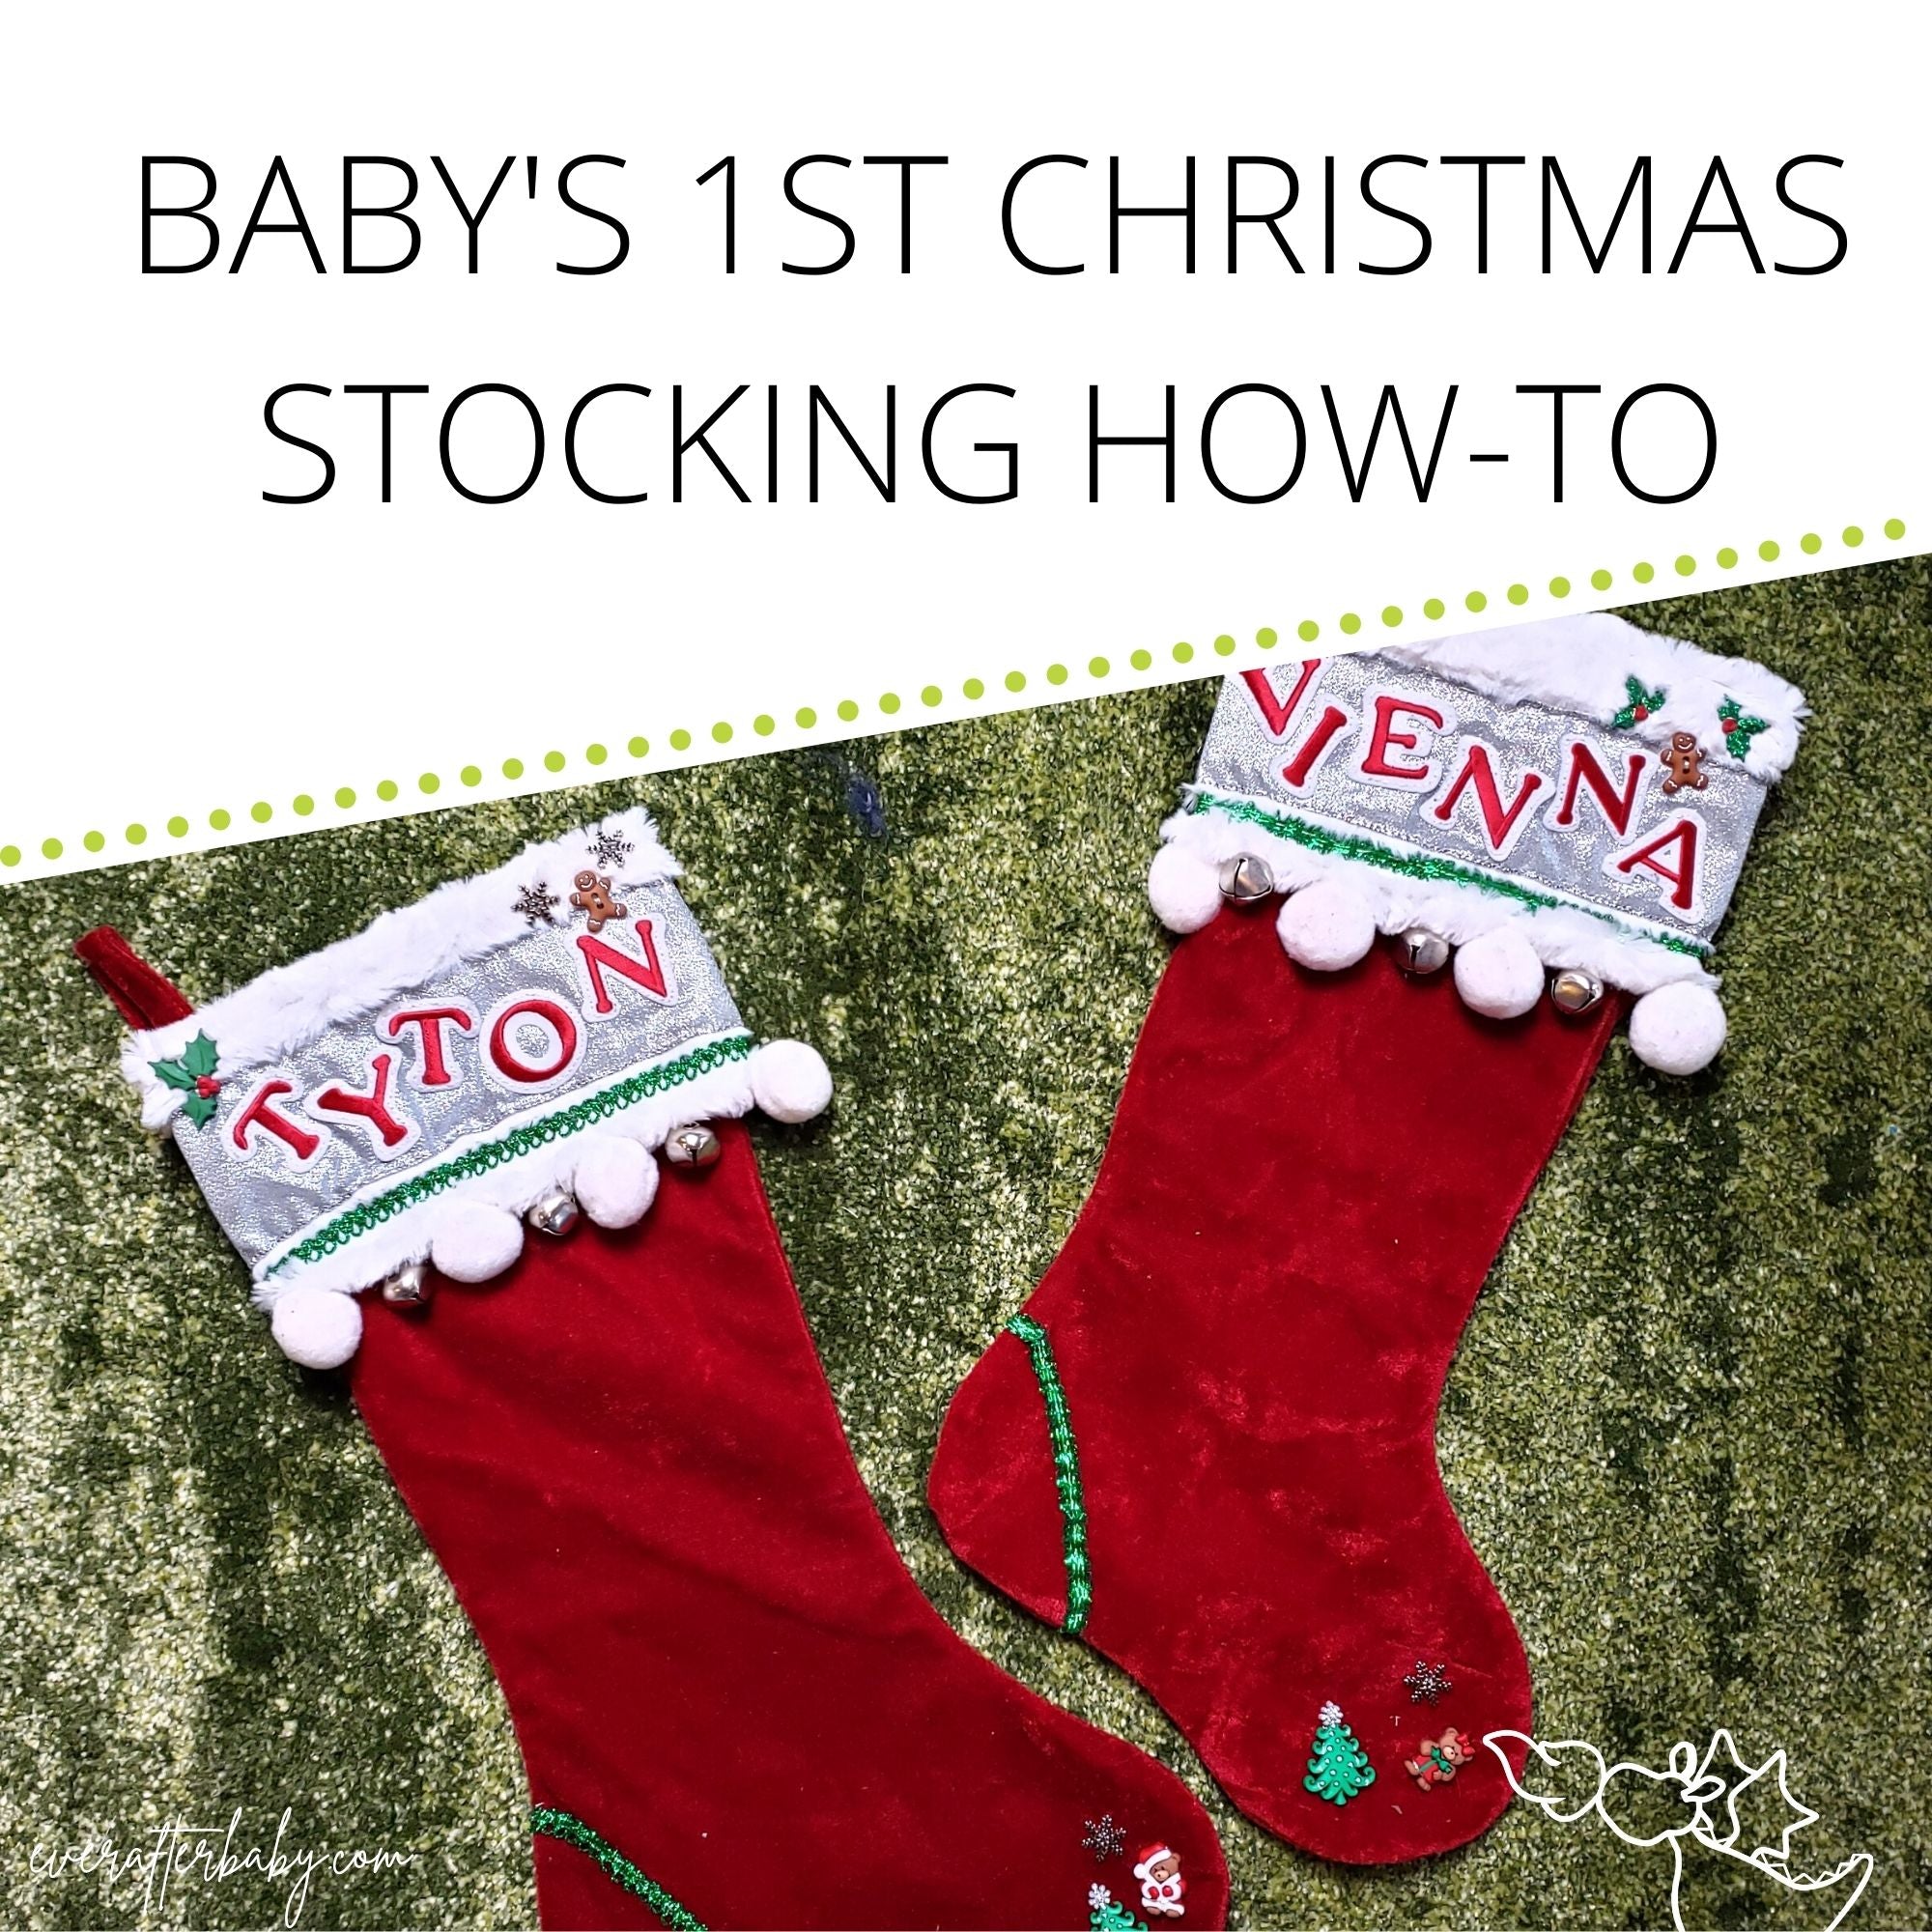 Turn Basic Stockings in One-of-a-Kind Keepsakes